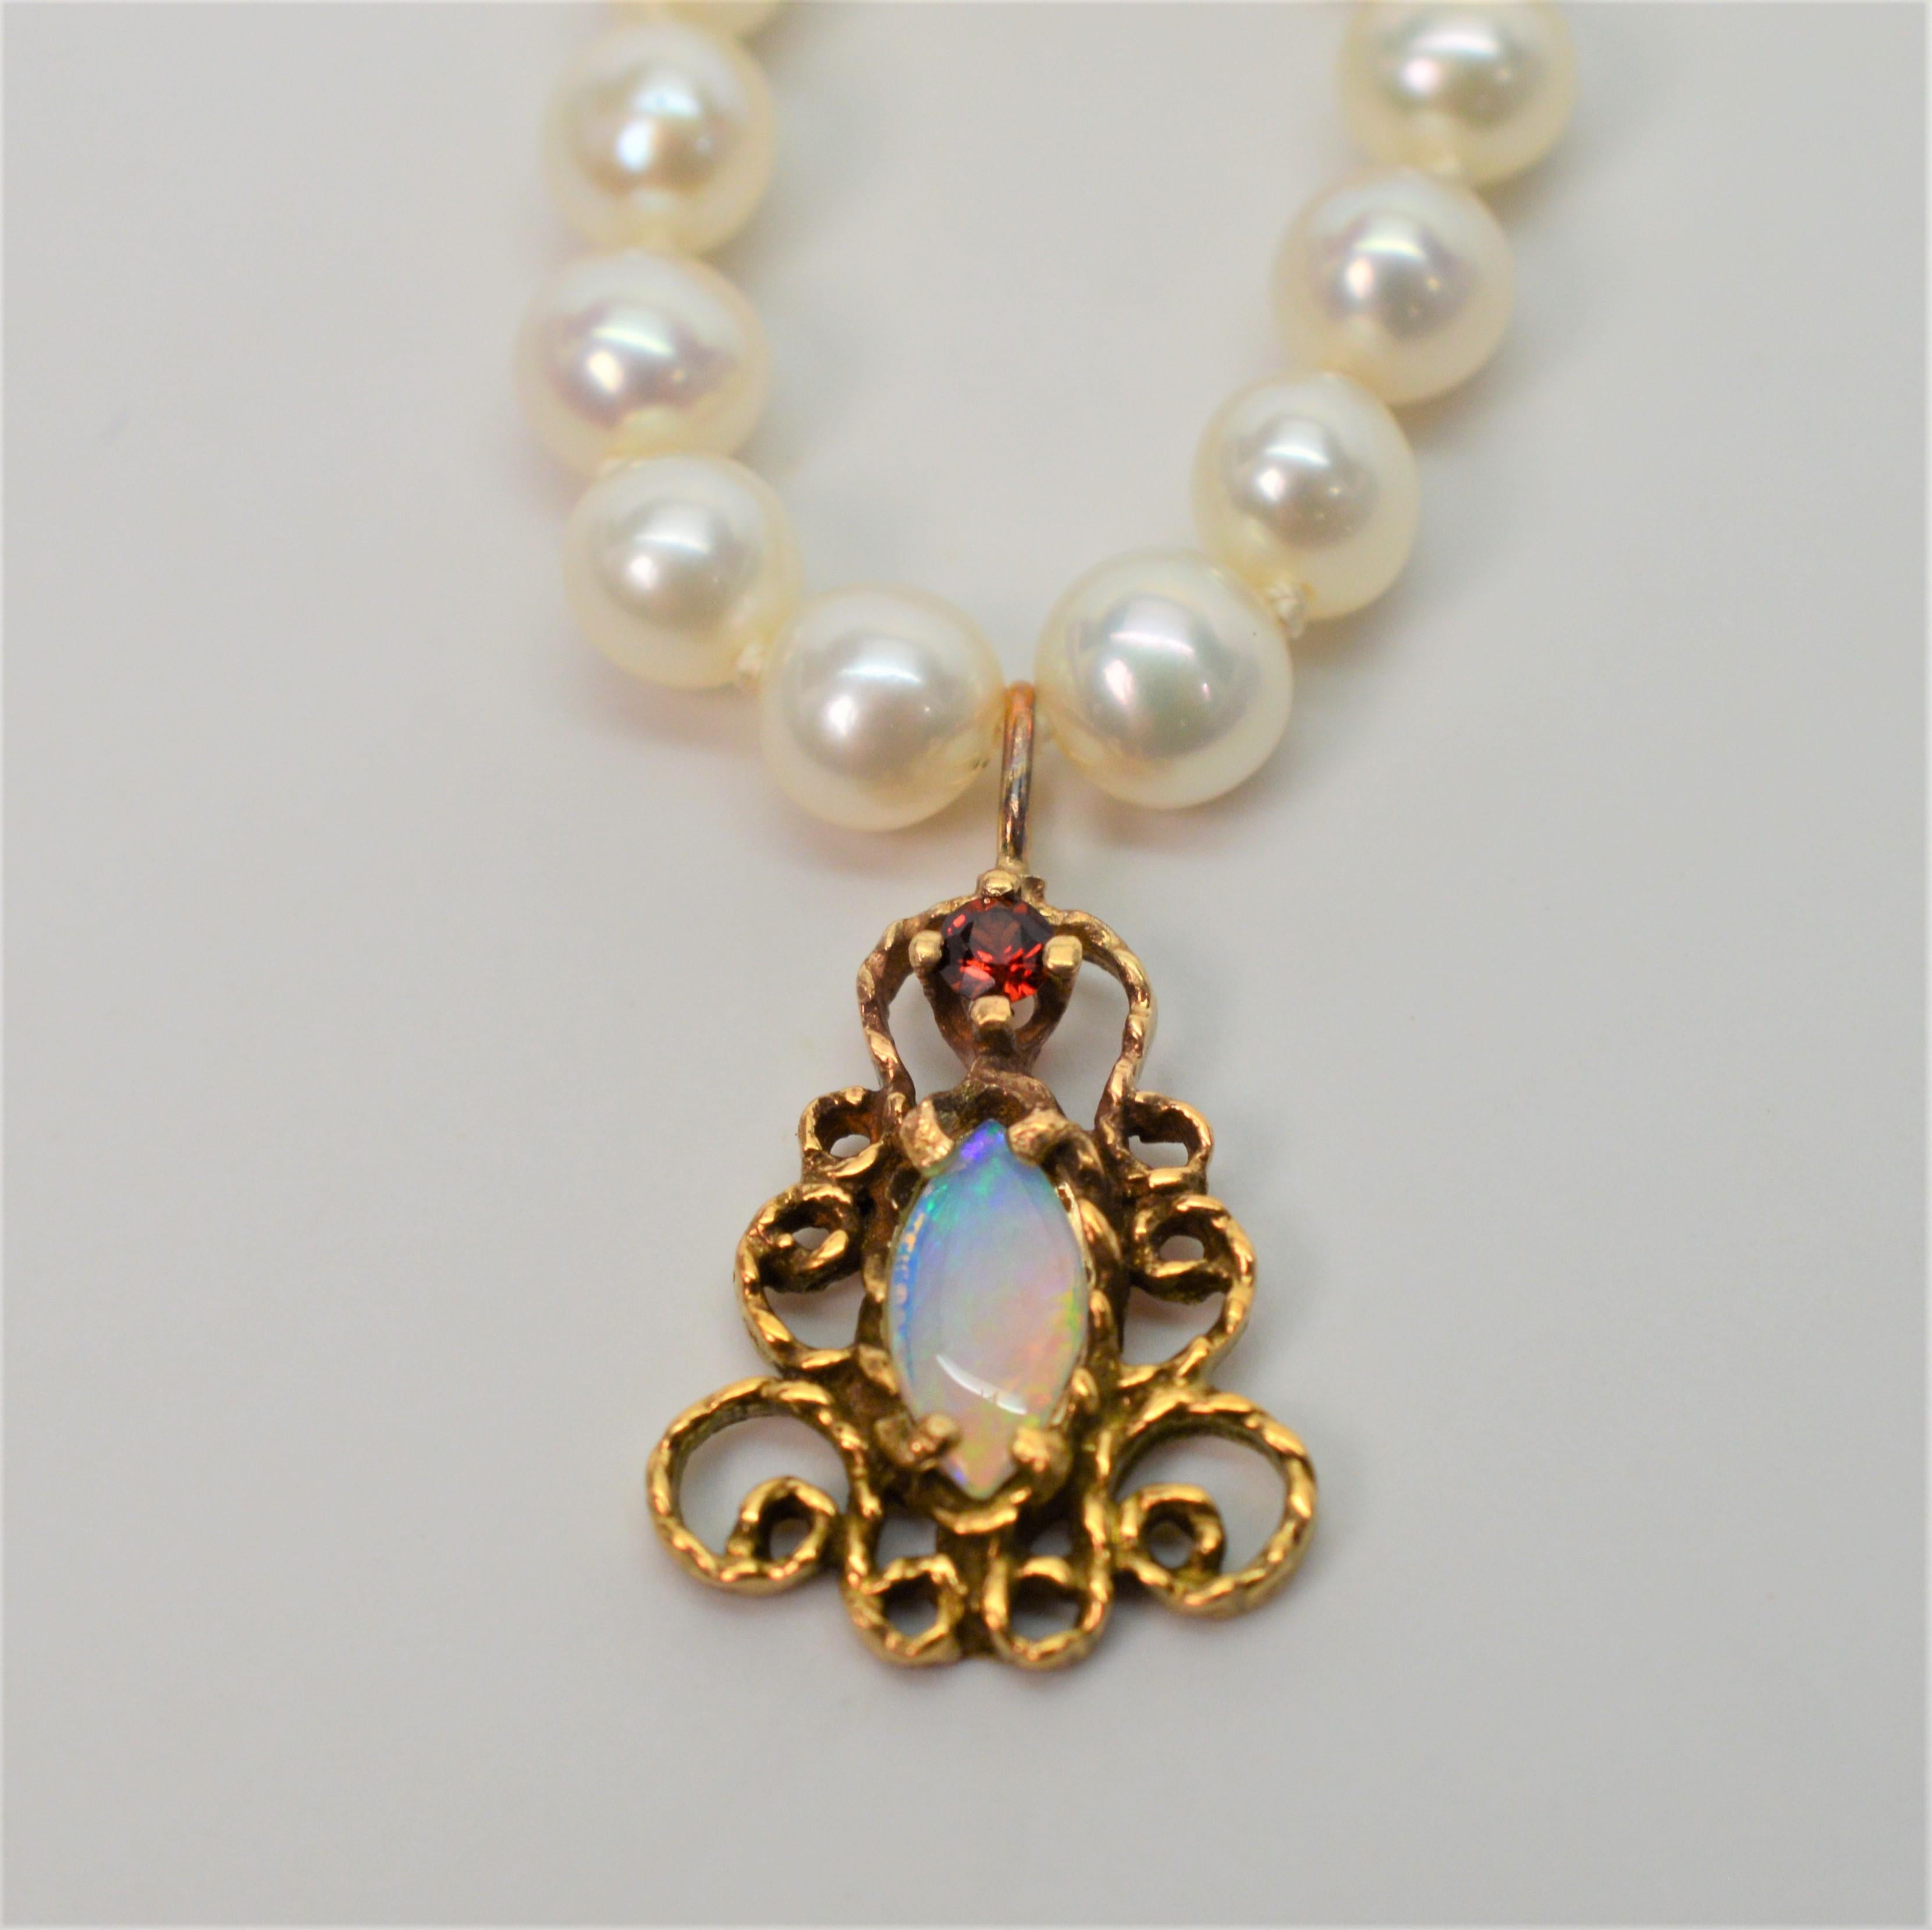 Antique-Style Opal Ruby Yellow Gold Charm Pendant on Pearl Necklace 2